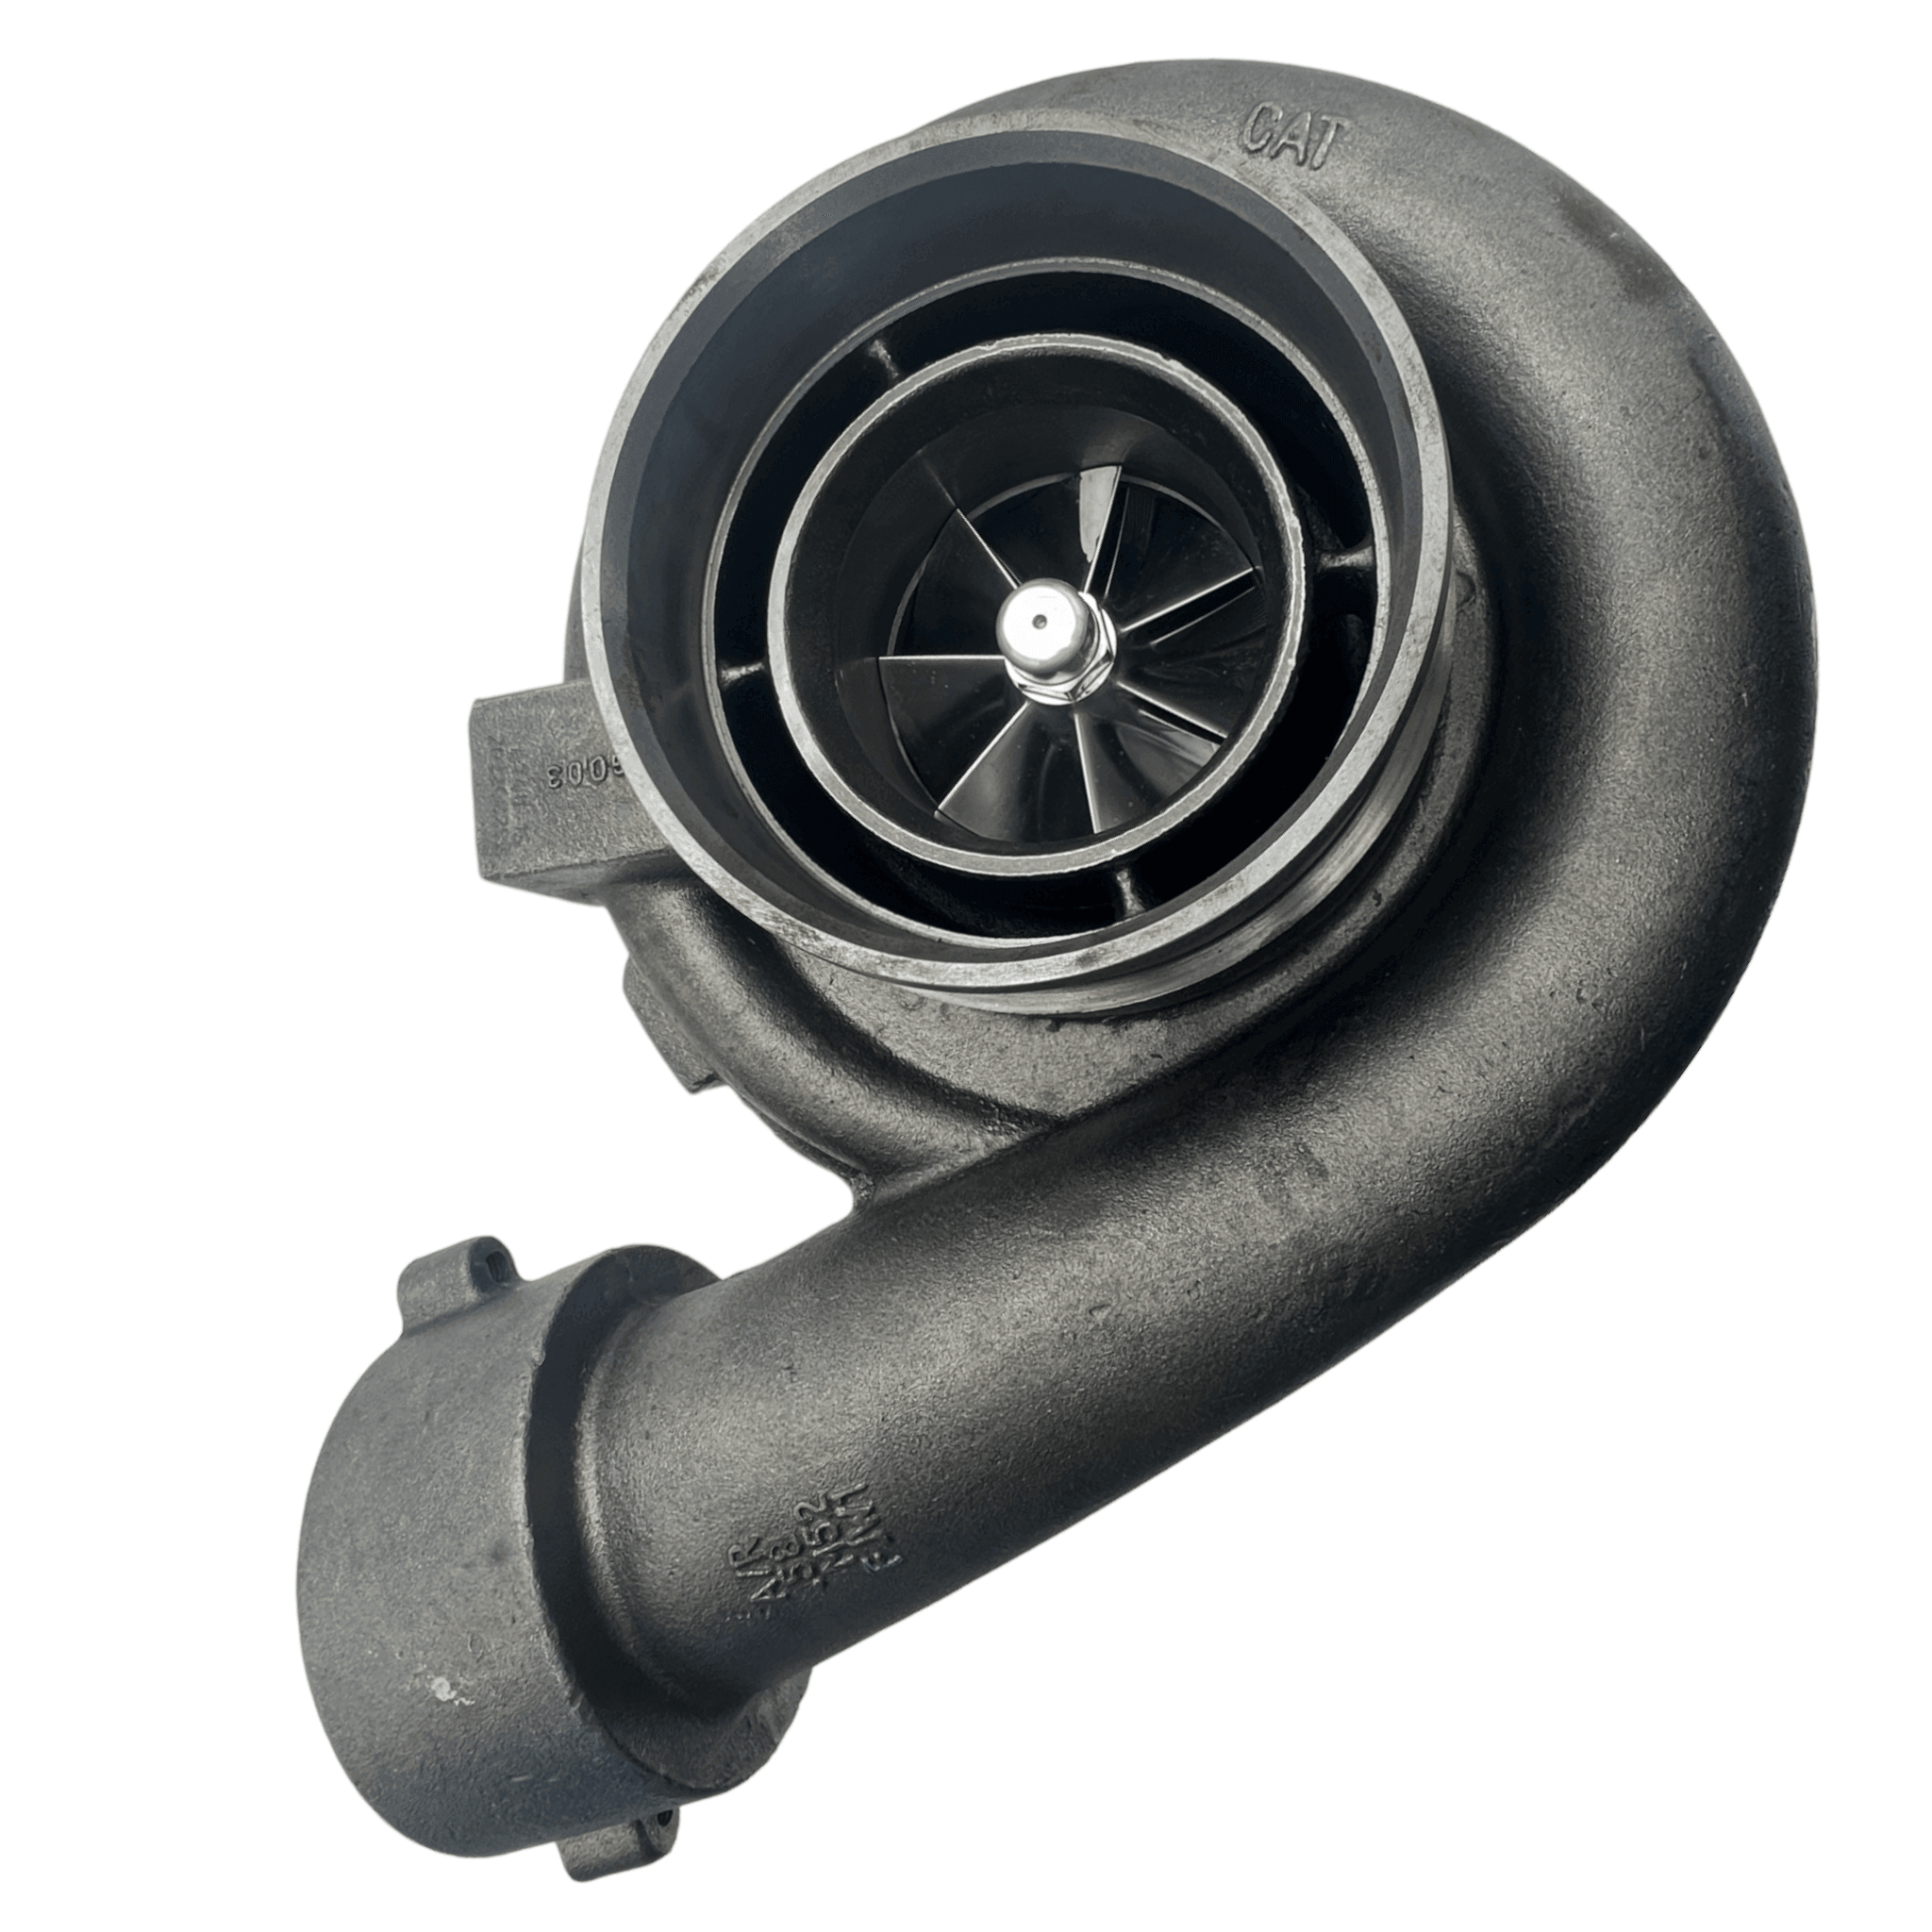 CA3930358 Genuine Cat Turbocharger For Caterpillar G3508/ G3516 Engines - ADVANCED TRUCK PARTS